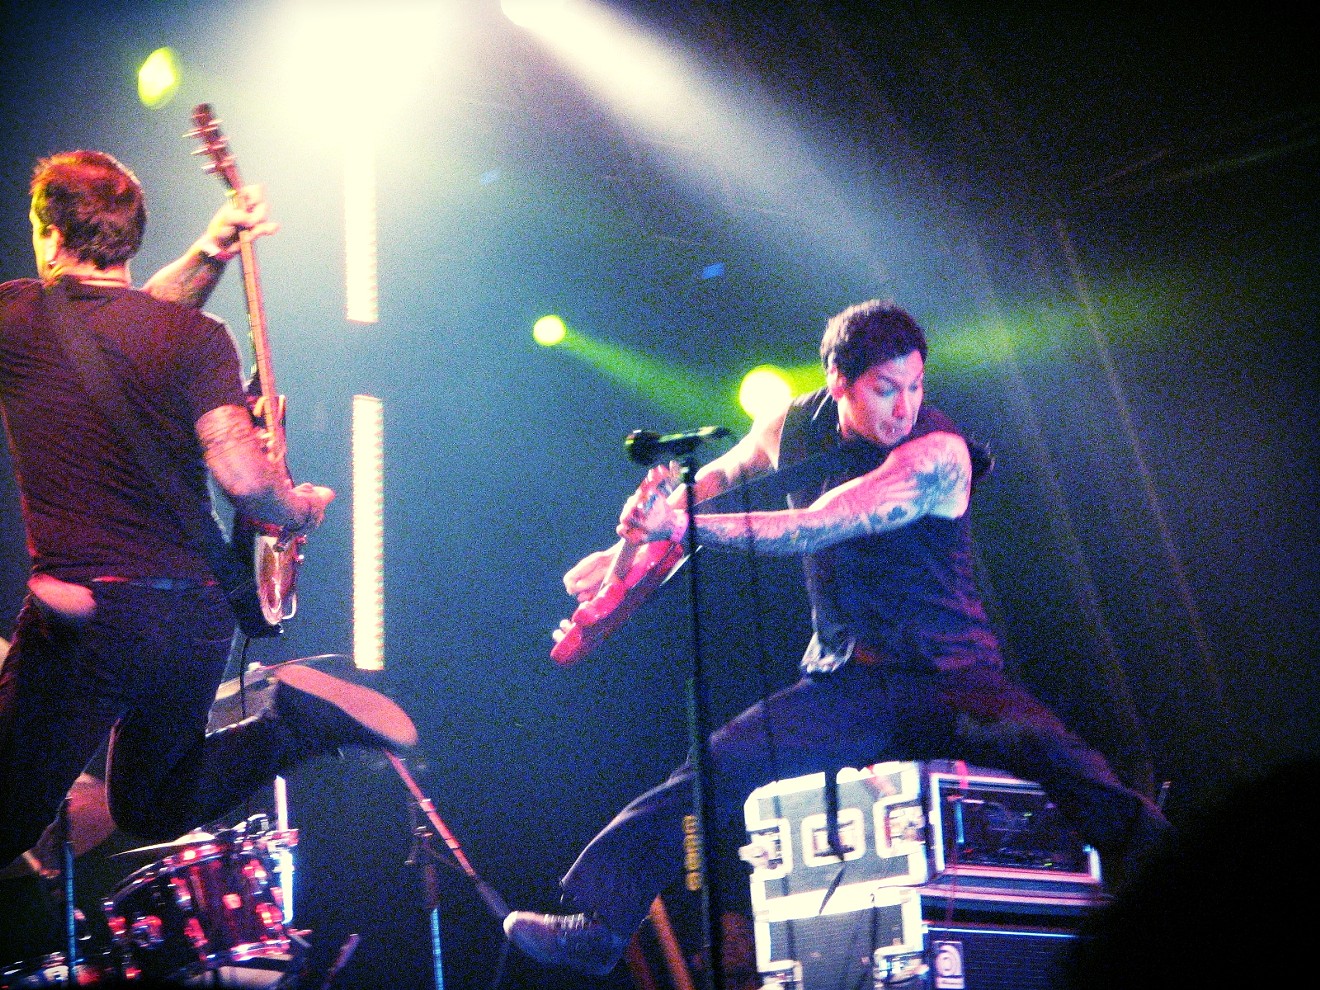 MxPX (Mike Herrera at right) in 2008.